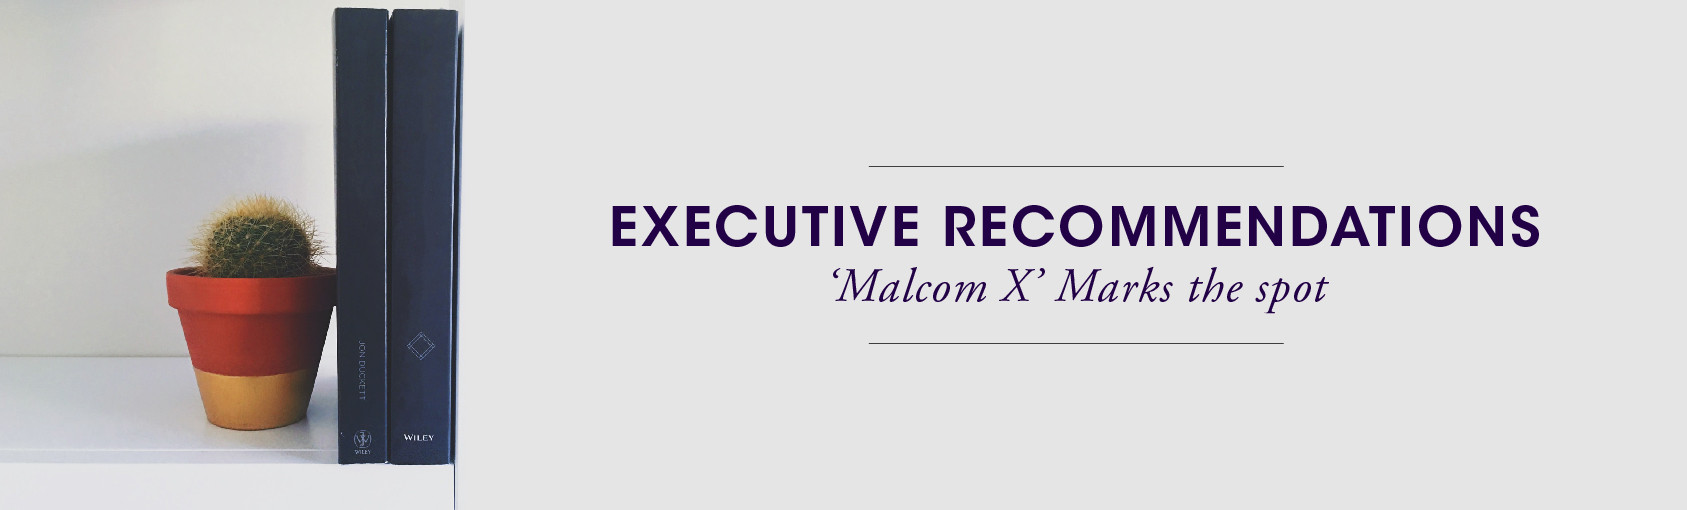 Executive Recommendations: Malcom X Marks the Spot banner